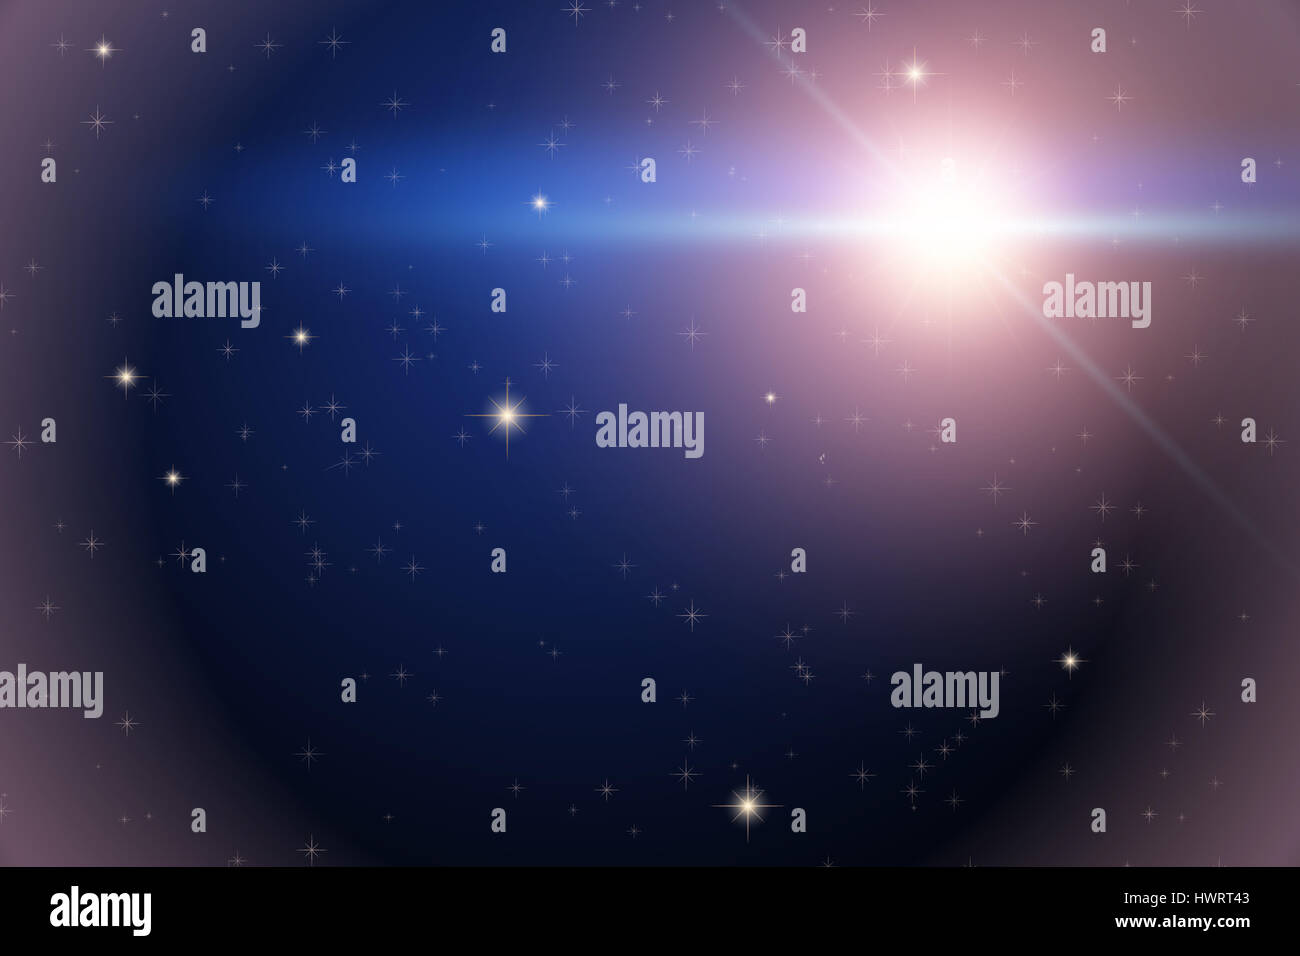 Background of Space with bright star. Abstract scientific background. Stock Photo